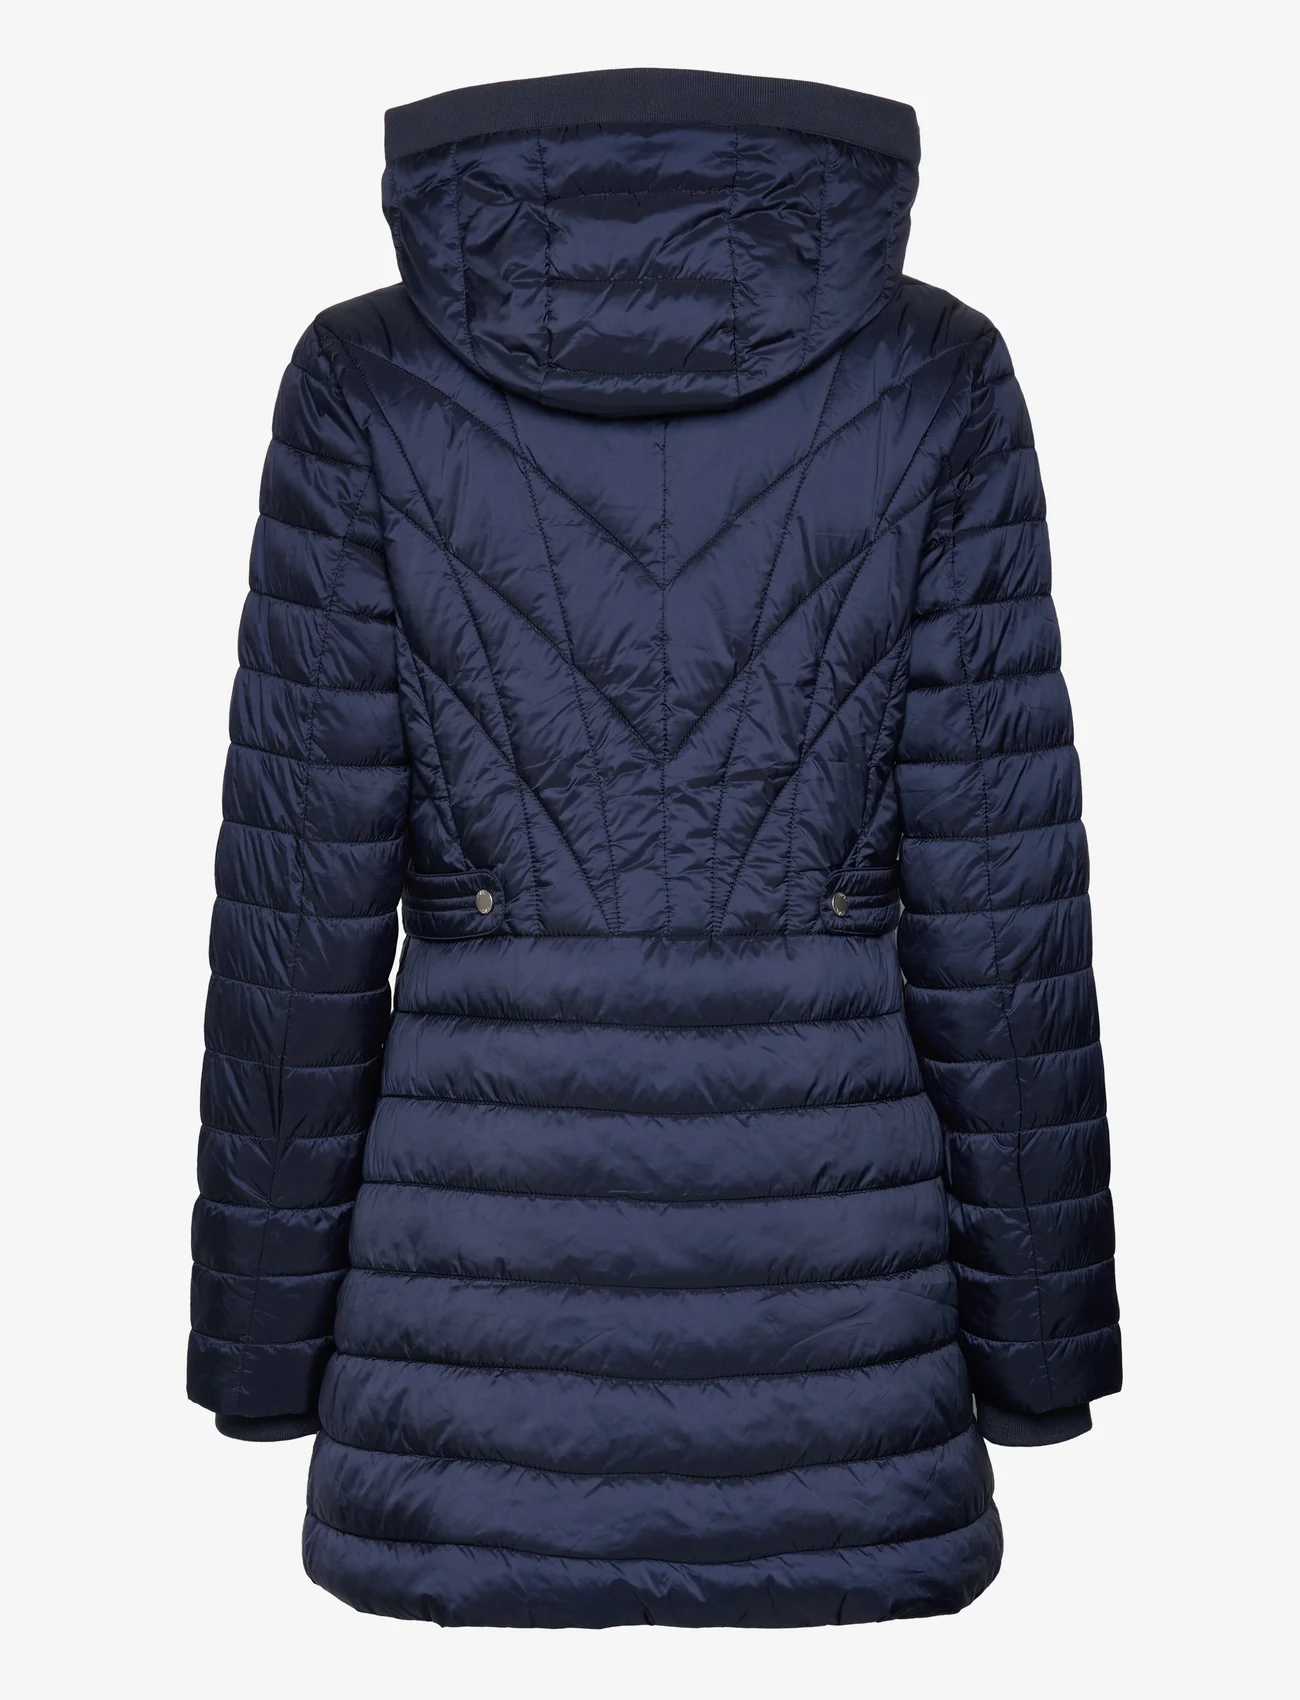 Esprit Collection - Jackets outdoor woven - winter jackets - navy - 1